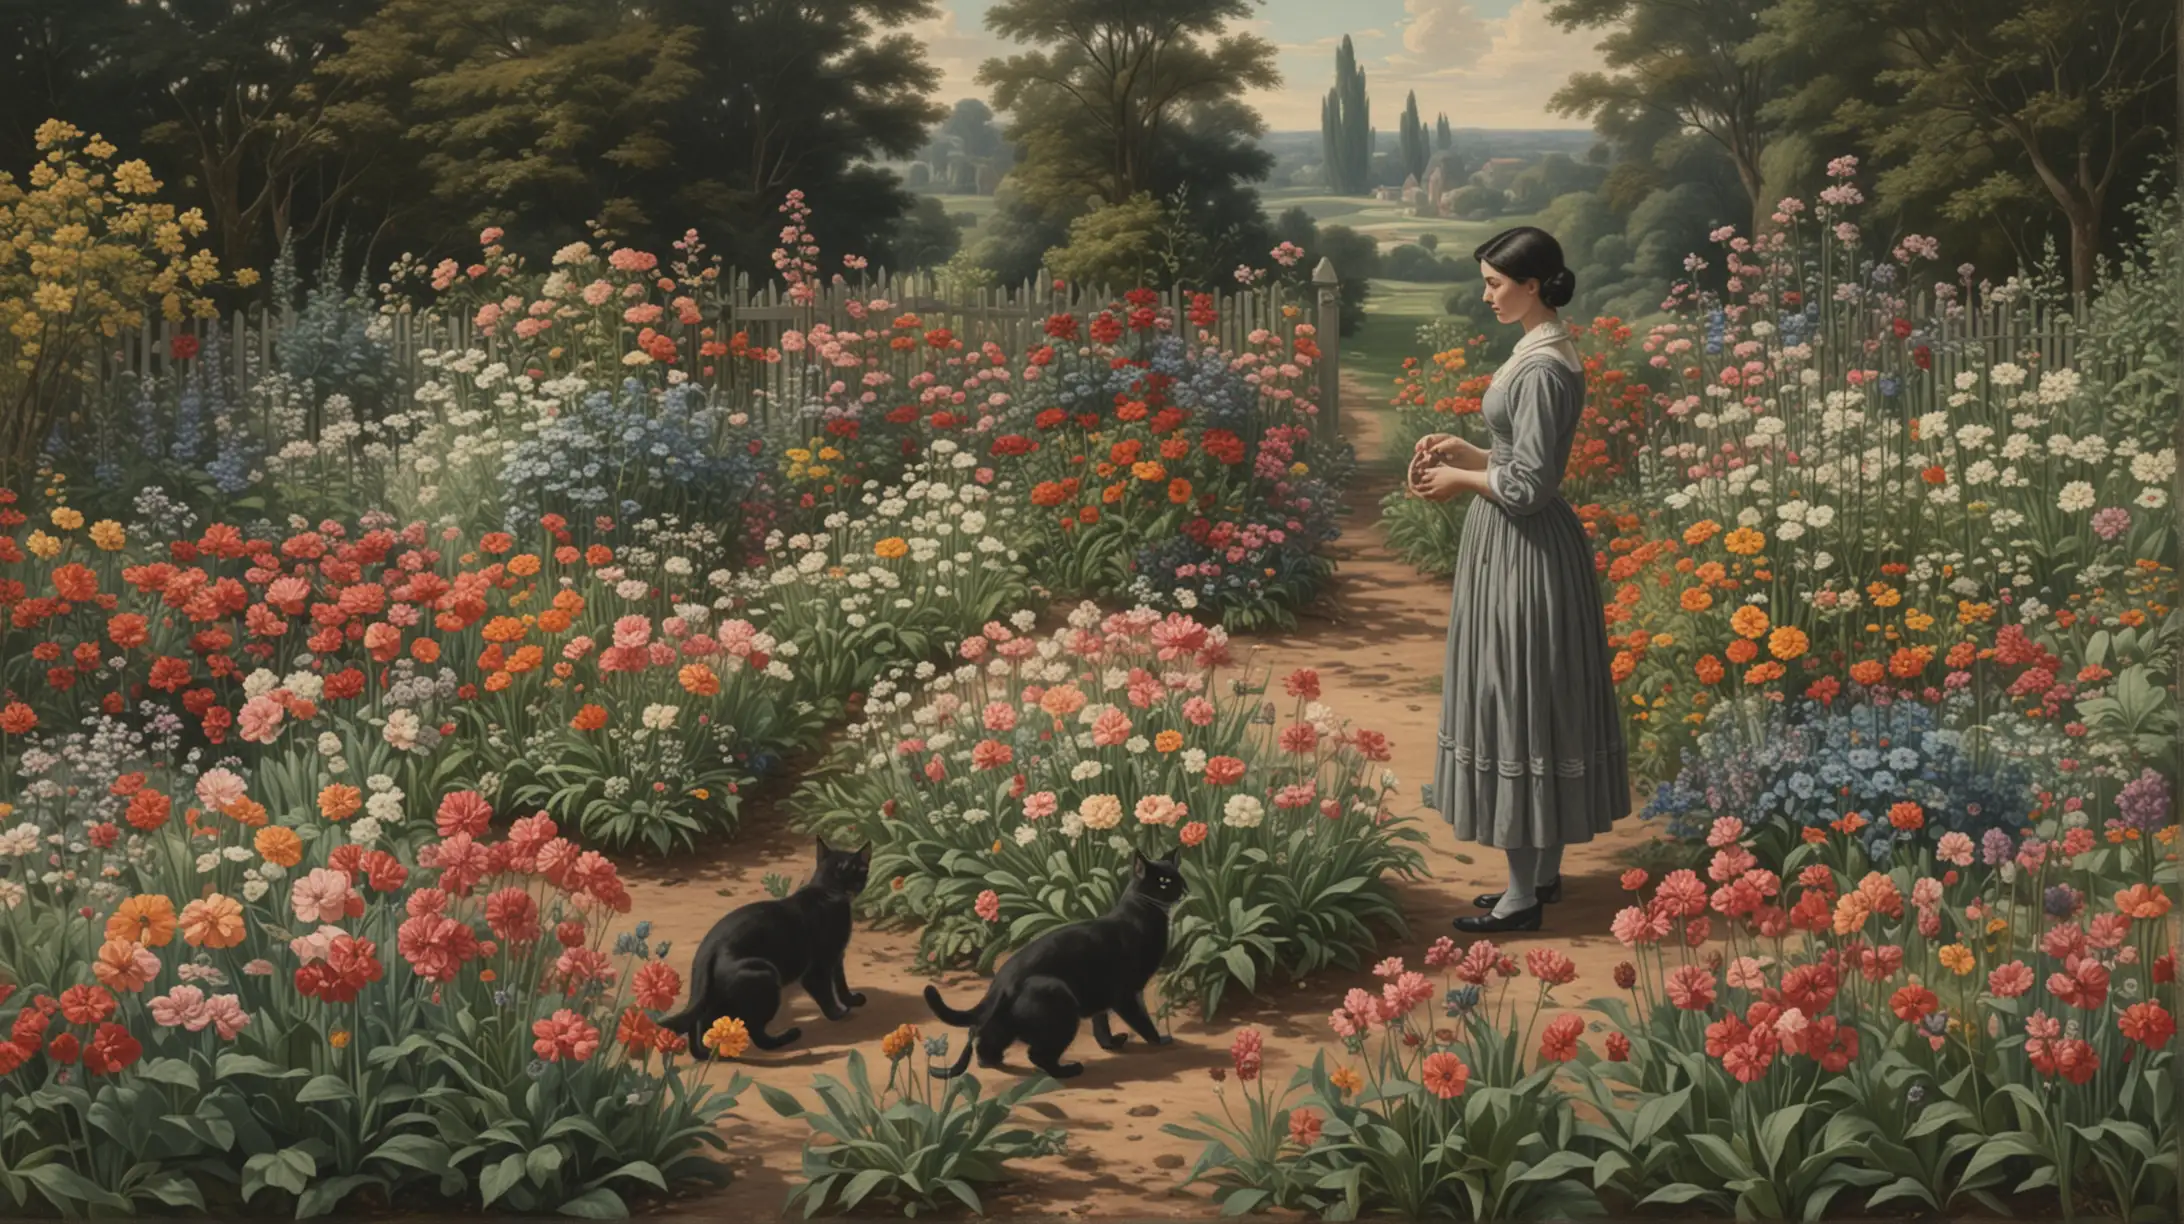 Dark Haired Woman Tending Flower Garden with Two Gray Cats